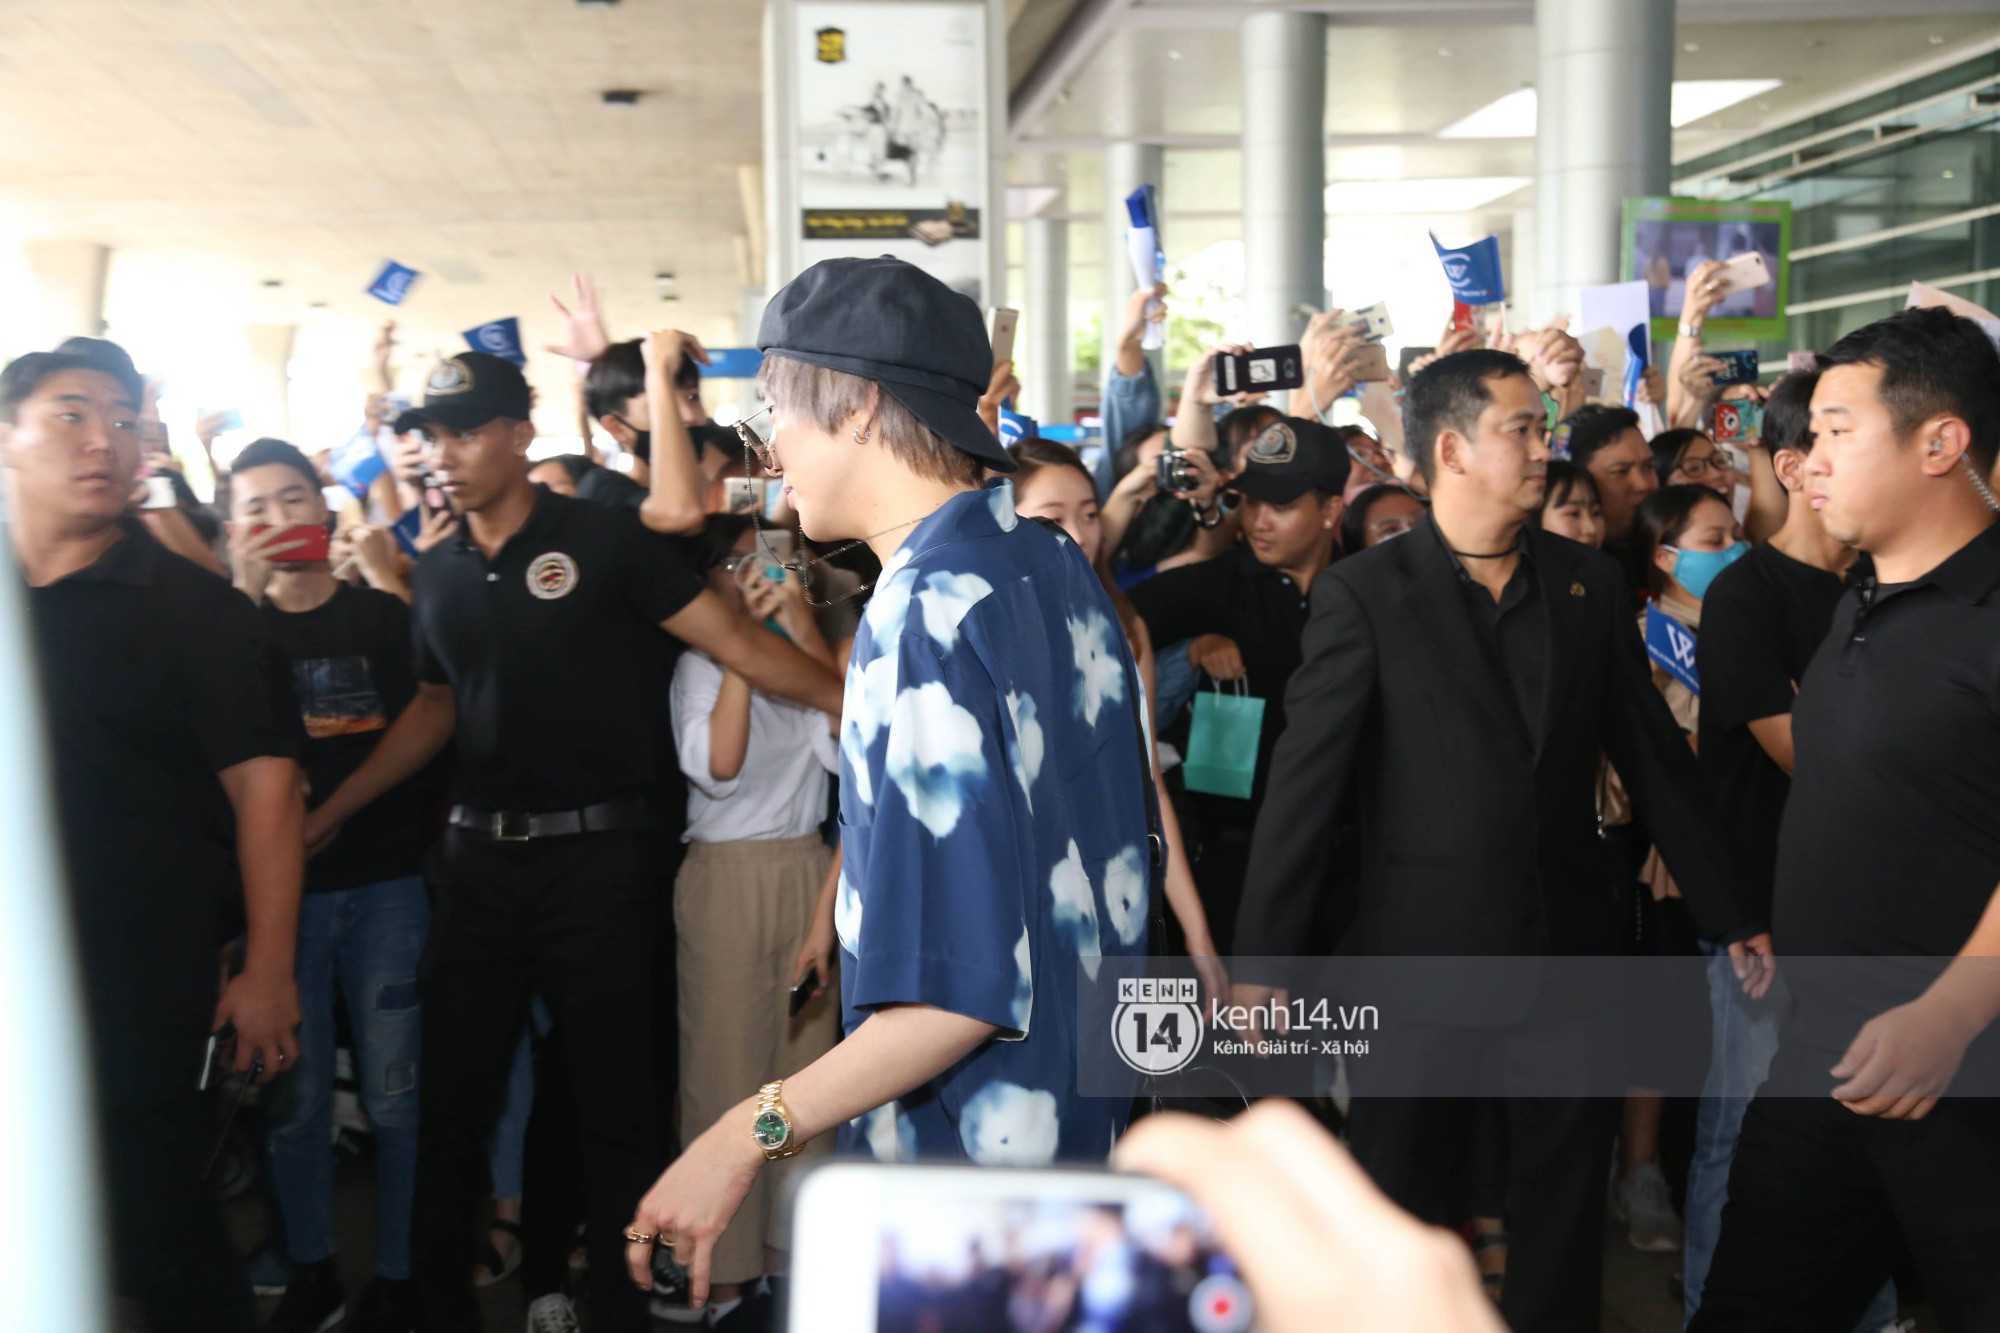 WINNER ensured that Tan Son Nhat airport fell apart, Mino had to remove the neck cracks but still cause a surprise because of the reverse shirt - Photo 2.